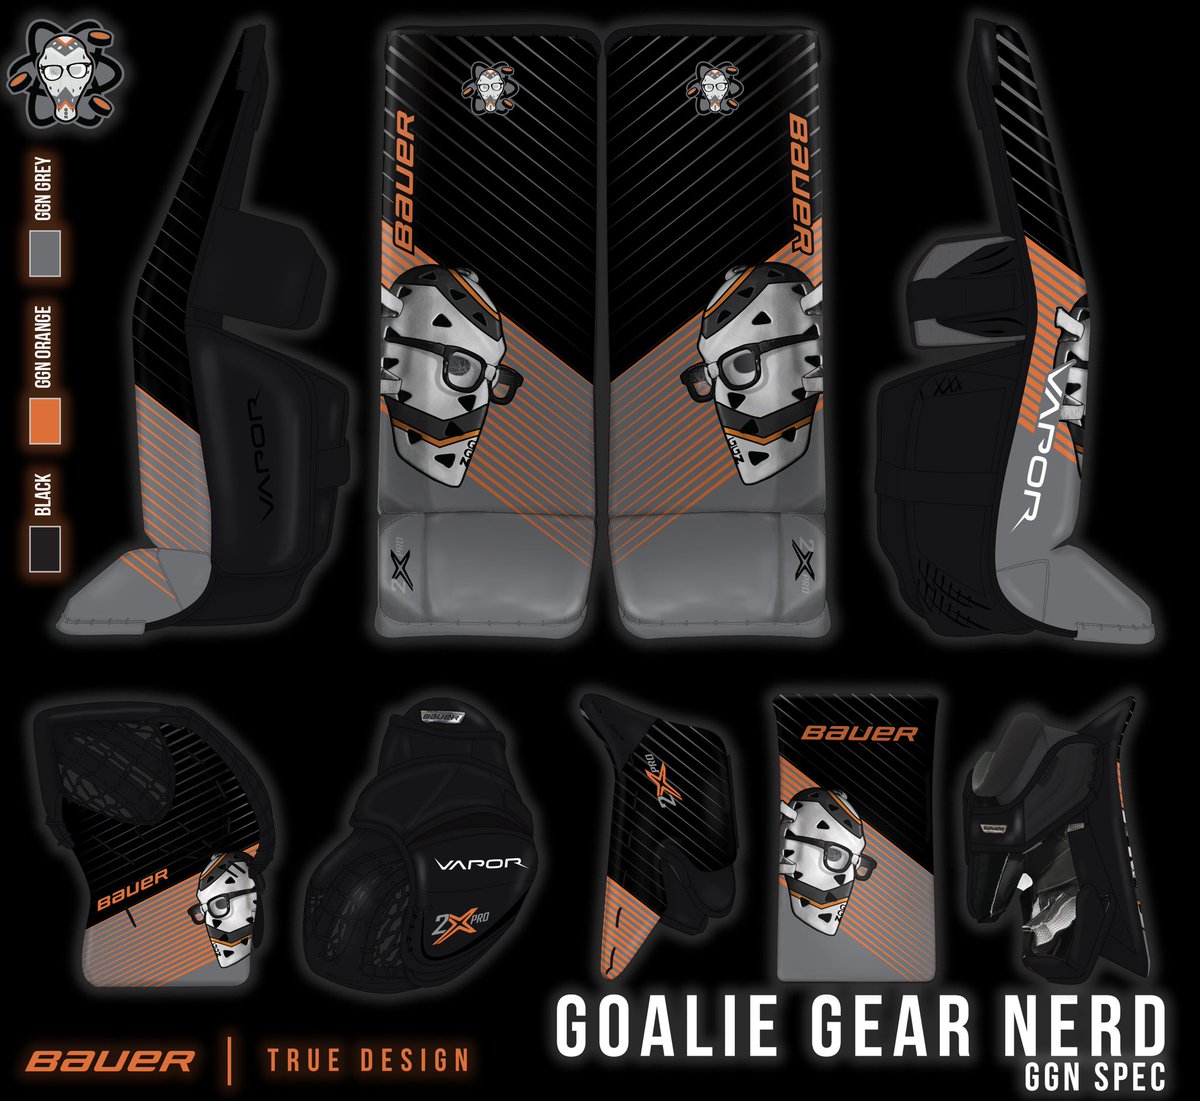 Goalie Gear Nerd on Twitter: "Thrilled to reveal our @bauerhockey True  Design. We will be covering the entire process in a later feature, but can  say the experience has been incredible. With